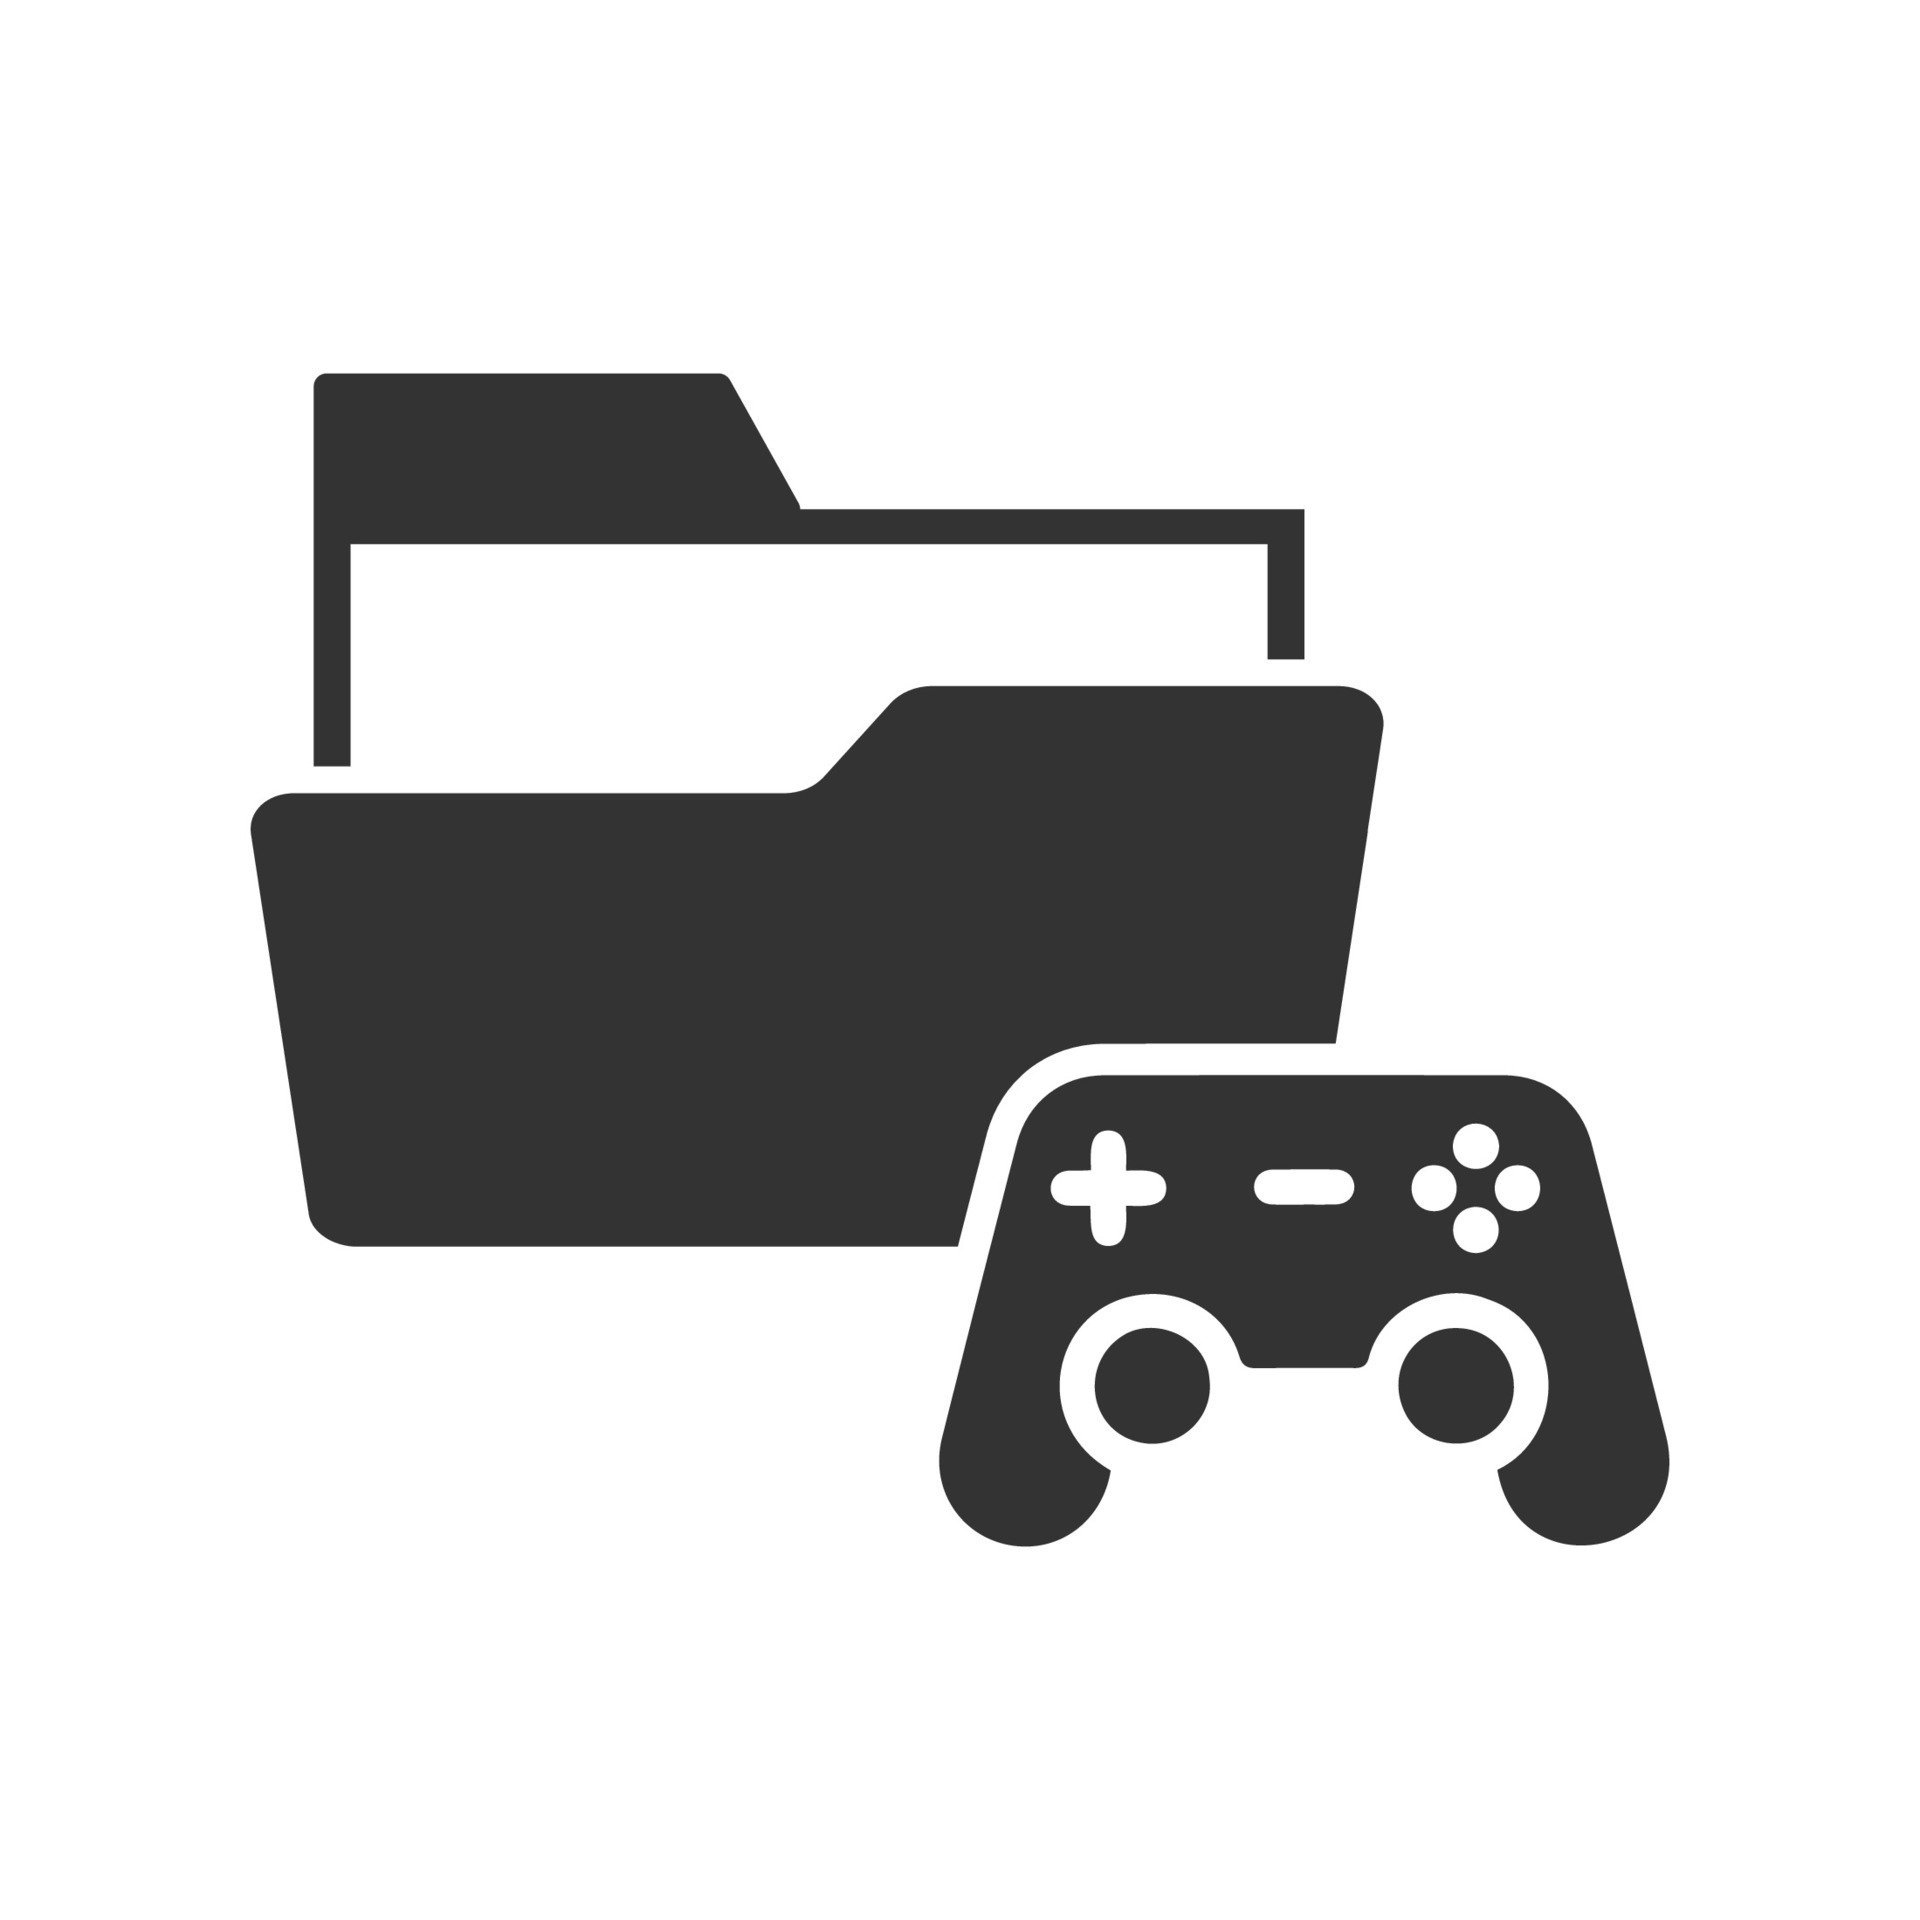 Vector games folder icon in dark color and white 26501091 Vector at Vecteezy